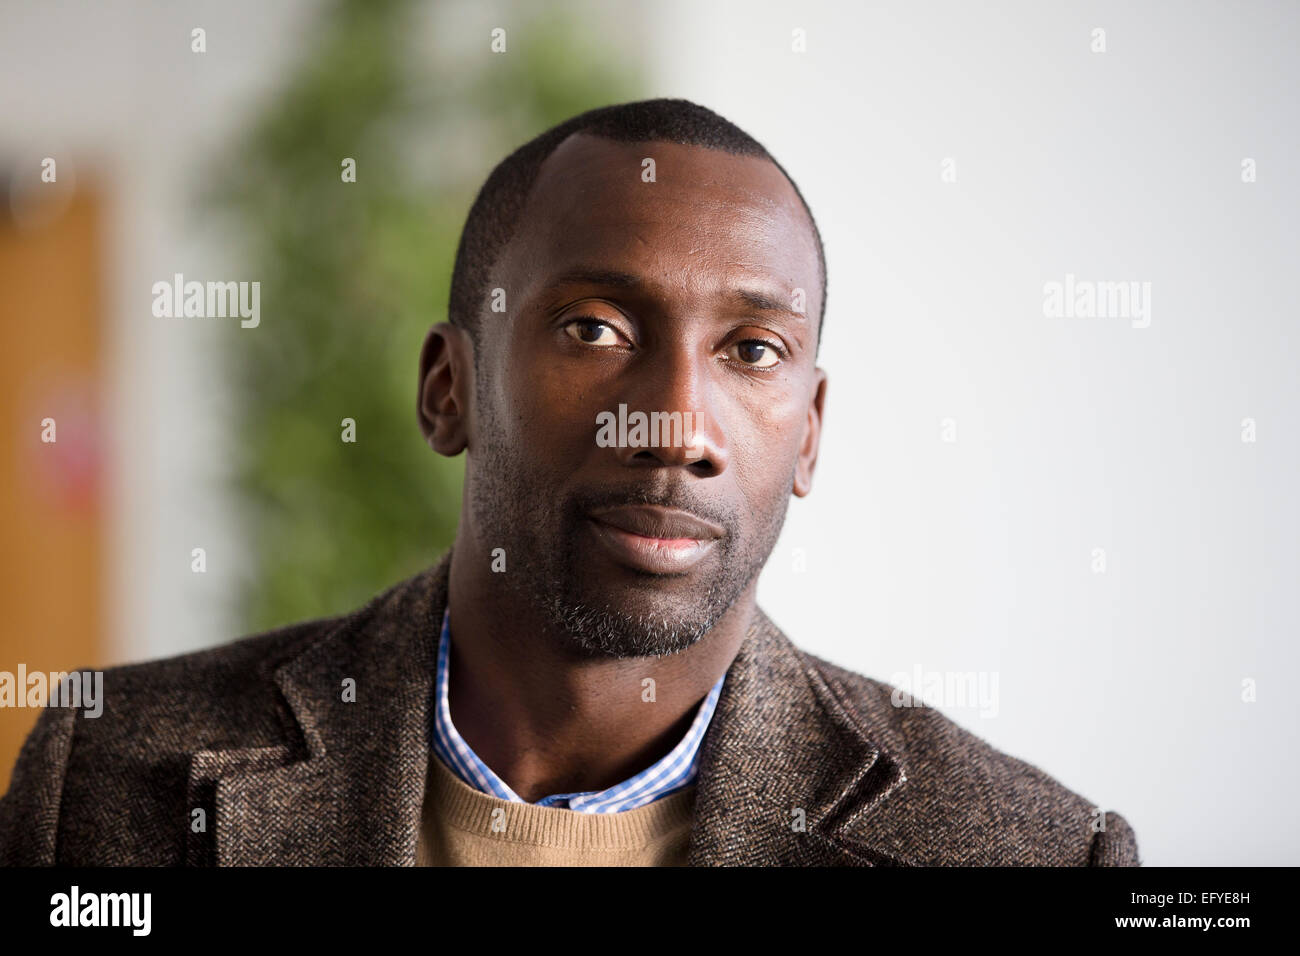 Jimmy Floyd Hasselbaink, former Chelsea player, now manager of Burton Albion Football Club Stock Photo